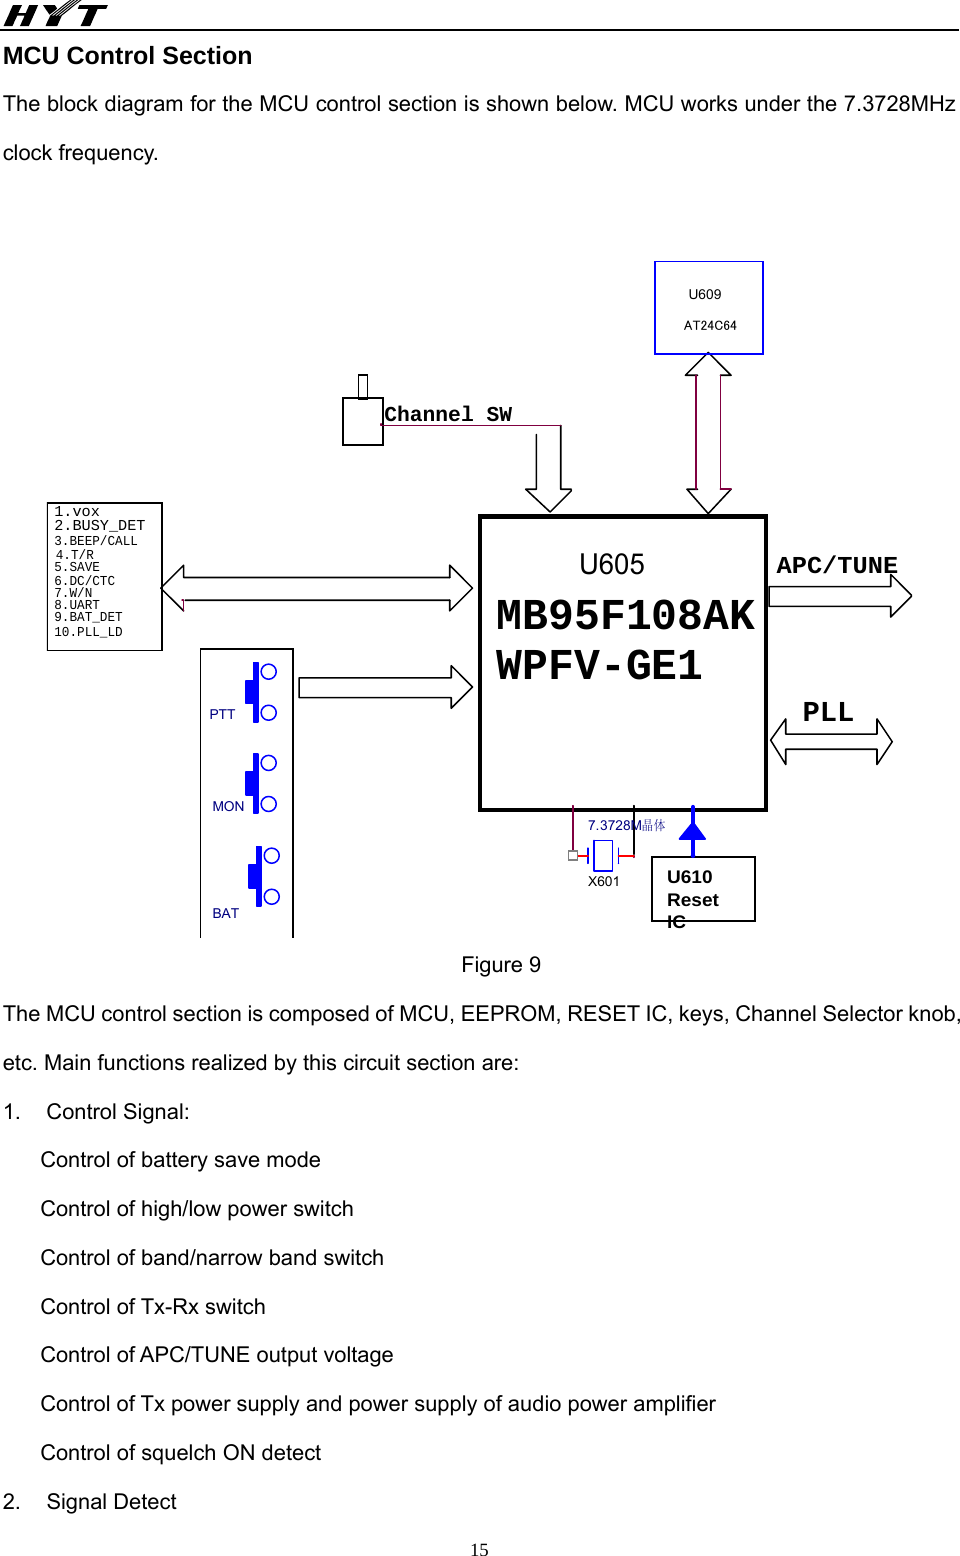                                                 15MCU Control Section The block diagram for the MCU control section is shown below. MCU works under the 7.3728MHz clock frequency.   Channel SWMB95F108AK WPFV-GE1U605PTTMONBATU609APC/TUNEPLL1.vox2.BUSY_DET8.UART7.W/N6.DC/CTC5.SAVE4.T/R3.BEEP/CALLX6019.BAT_DETU610ResetIC10.PLL_LD7.3728M晶体 Figure 9 The MCU control section is composed of MCU, EEPROM, RESET IC, keys, Channel Selector knob, etc. Main functions realized by this circuit section are: 1. Control Signal: Control of battery save mode Control of high/low power switch Control of band/narrow band switch Control of Tx-Rx switch Control of APC/TUNE output voltage Control of Tx power supply and power supply of audio power amplifier Control of squelch ON detect 2. Signal Detect 